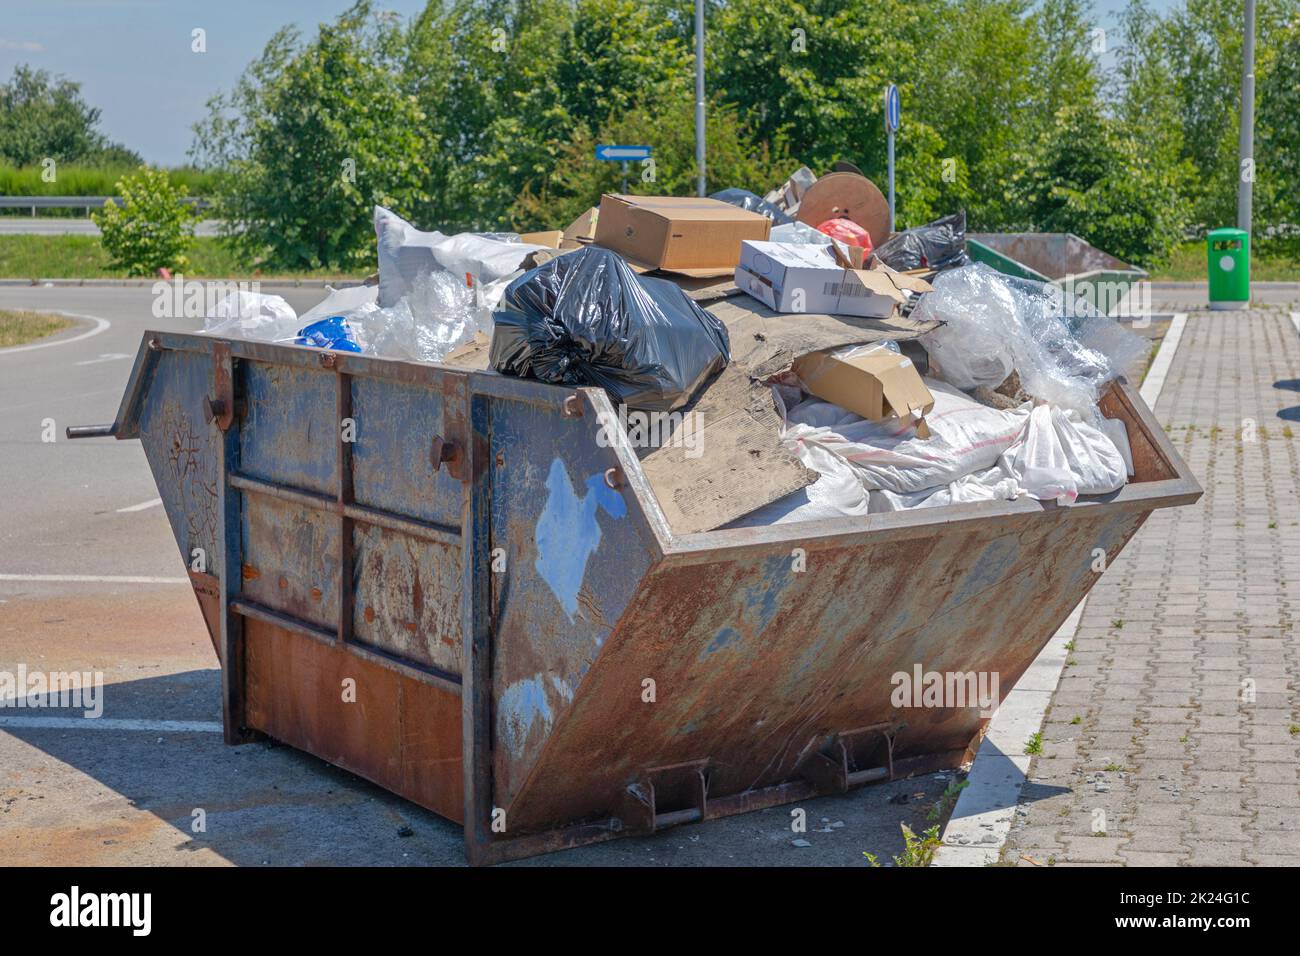 Overloaded Skip Trash Container at Parking Place Stock Photo